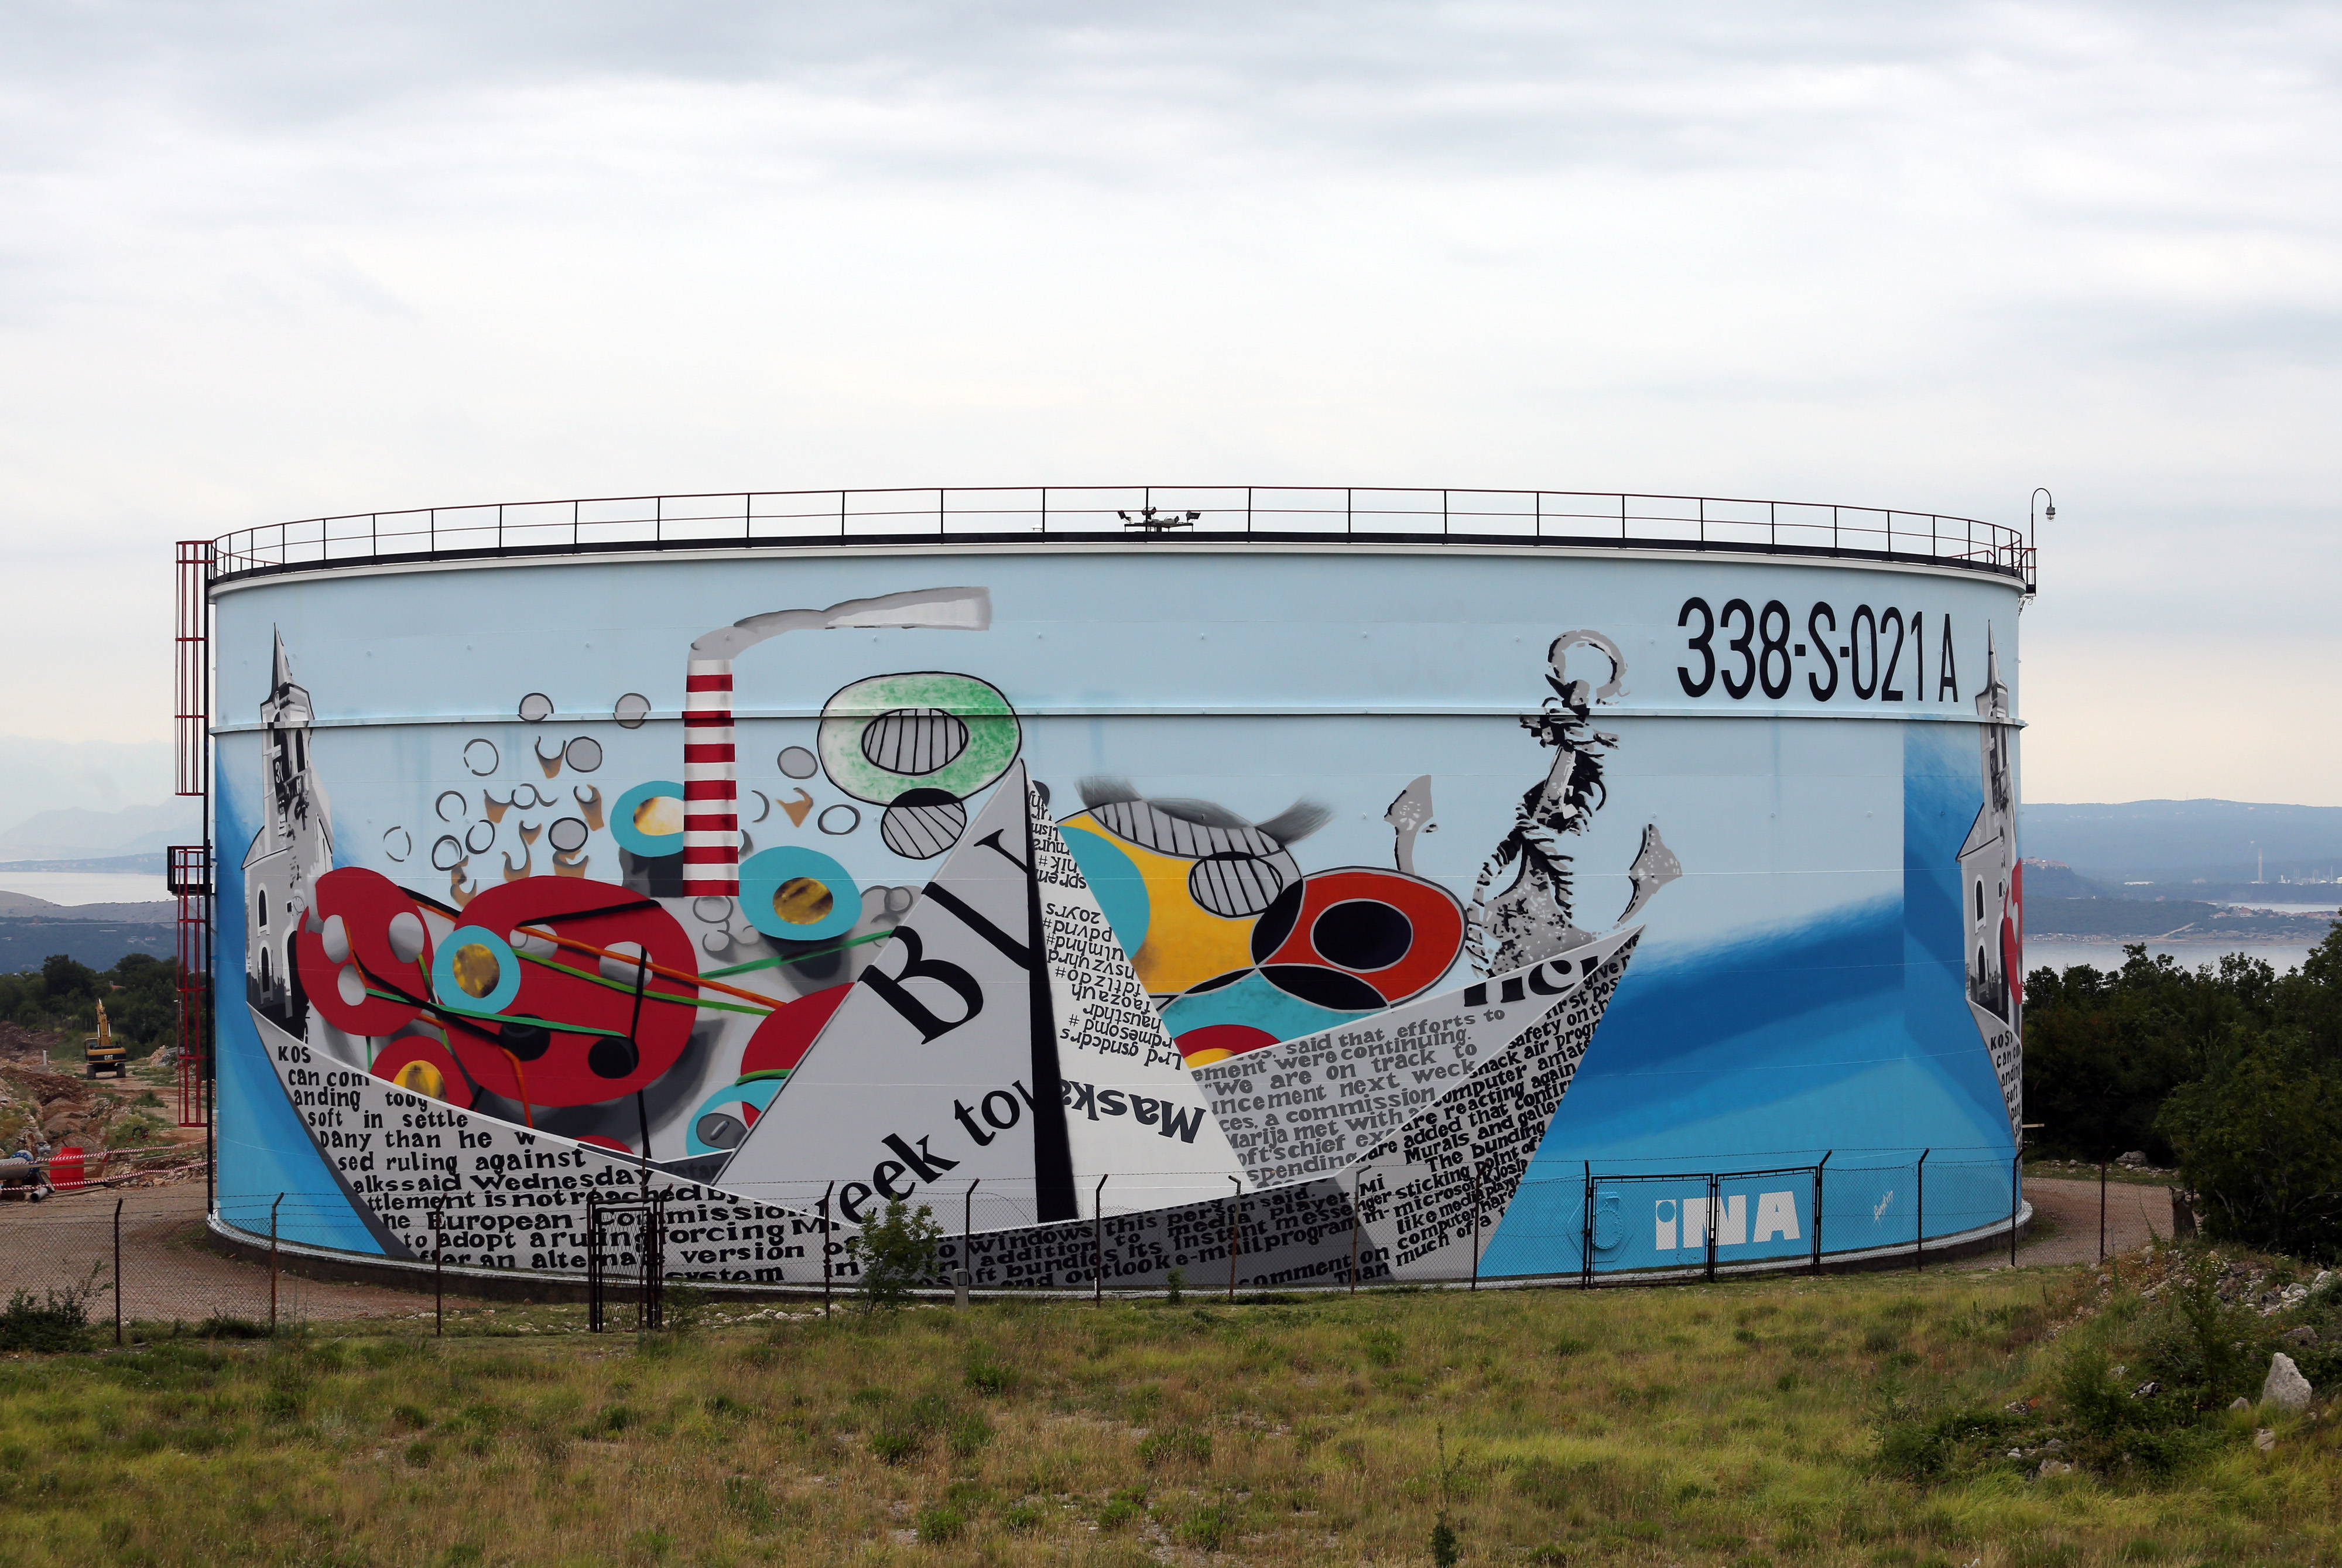 The largest tank with mural in Croatia